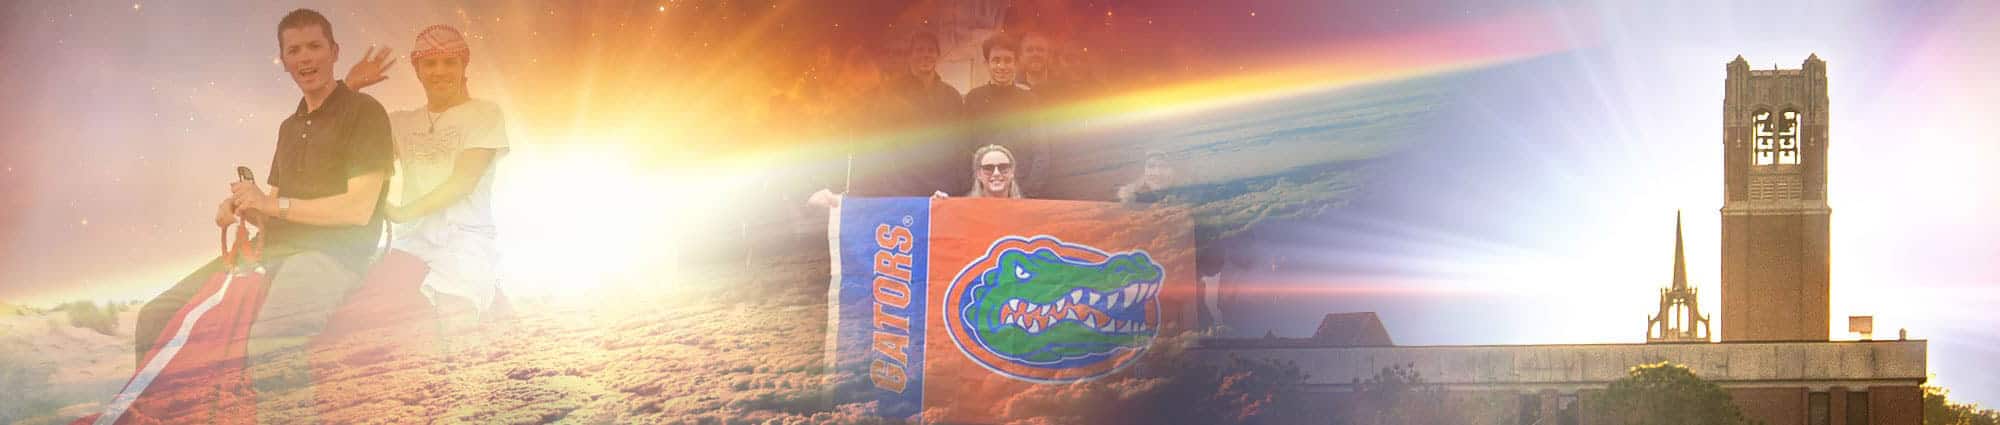 Collage of Global Gators and Century Tower